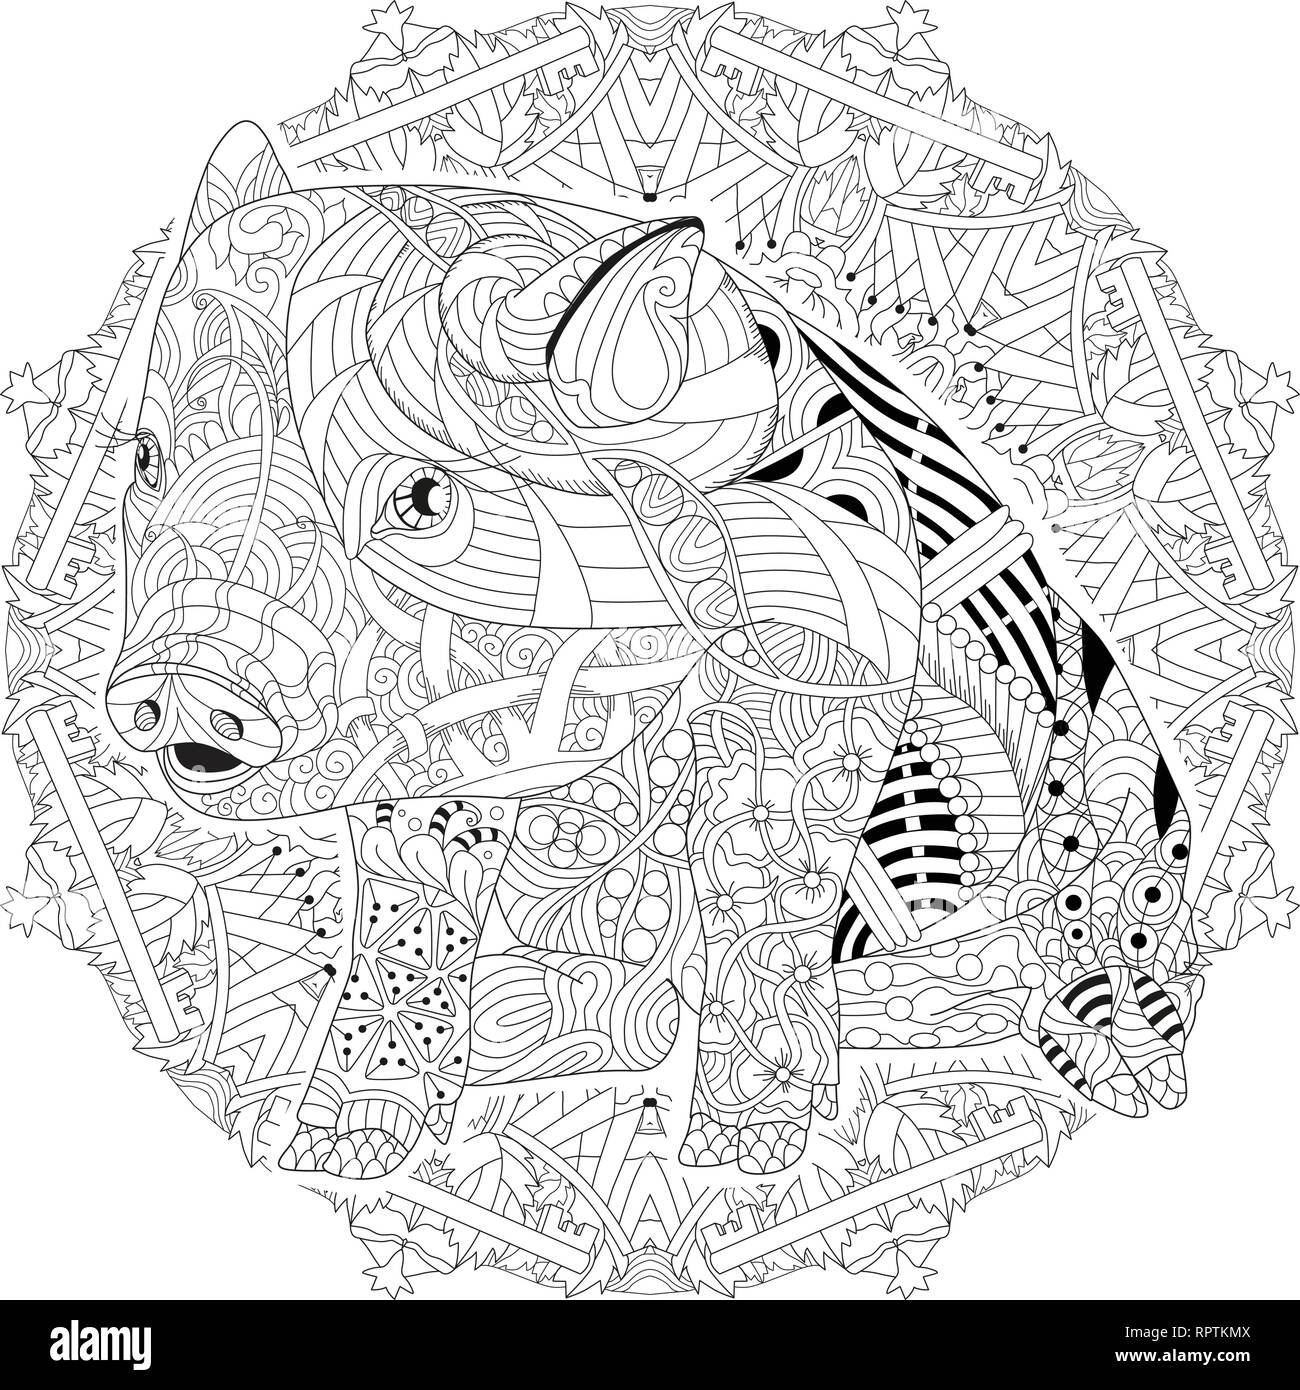 Zentangle illustration pig with mandala. Zentangle or doodle piglet. Coloring book domestic animal. Stock Vector